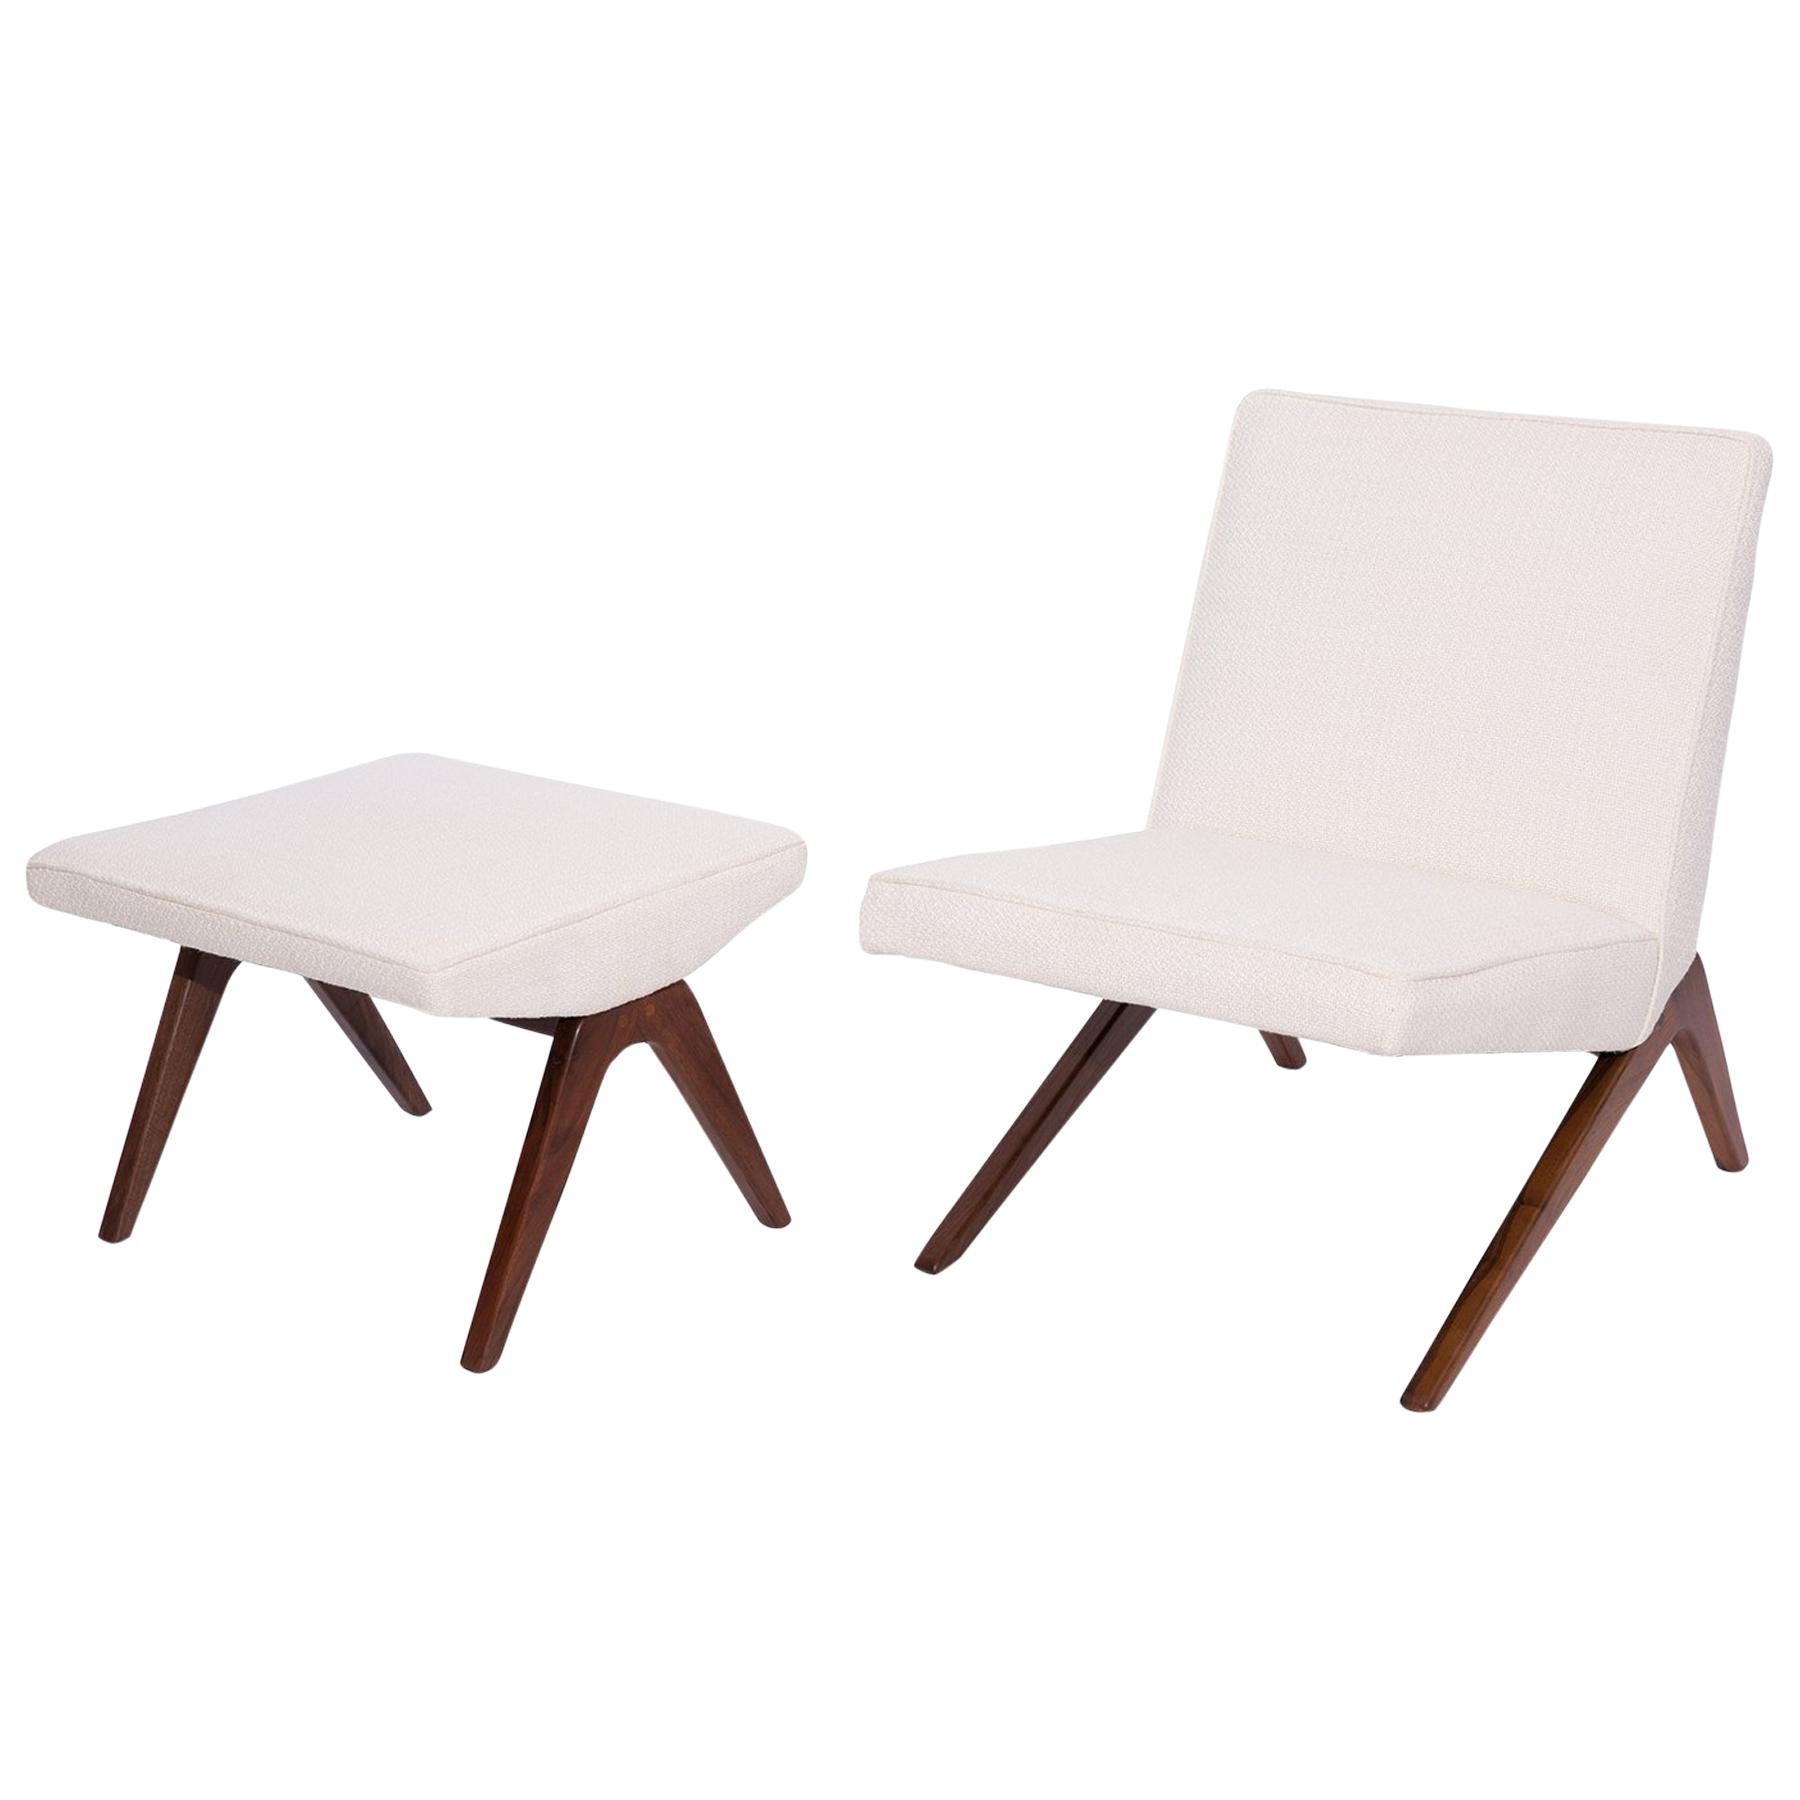 Studio Crafted Lounge Chair and Ottoman